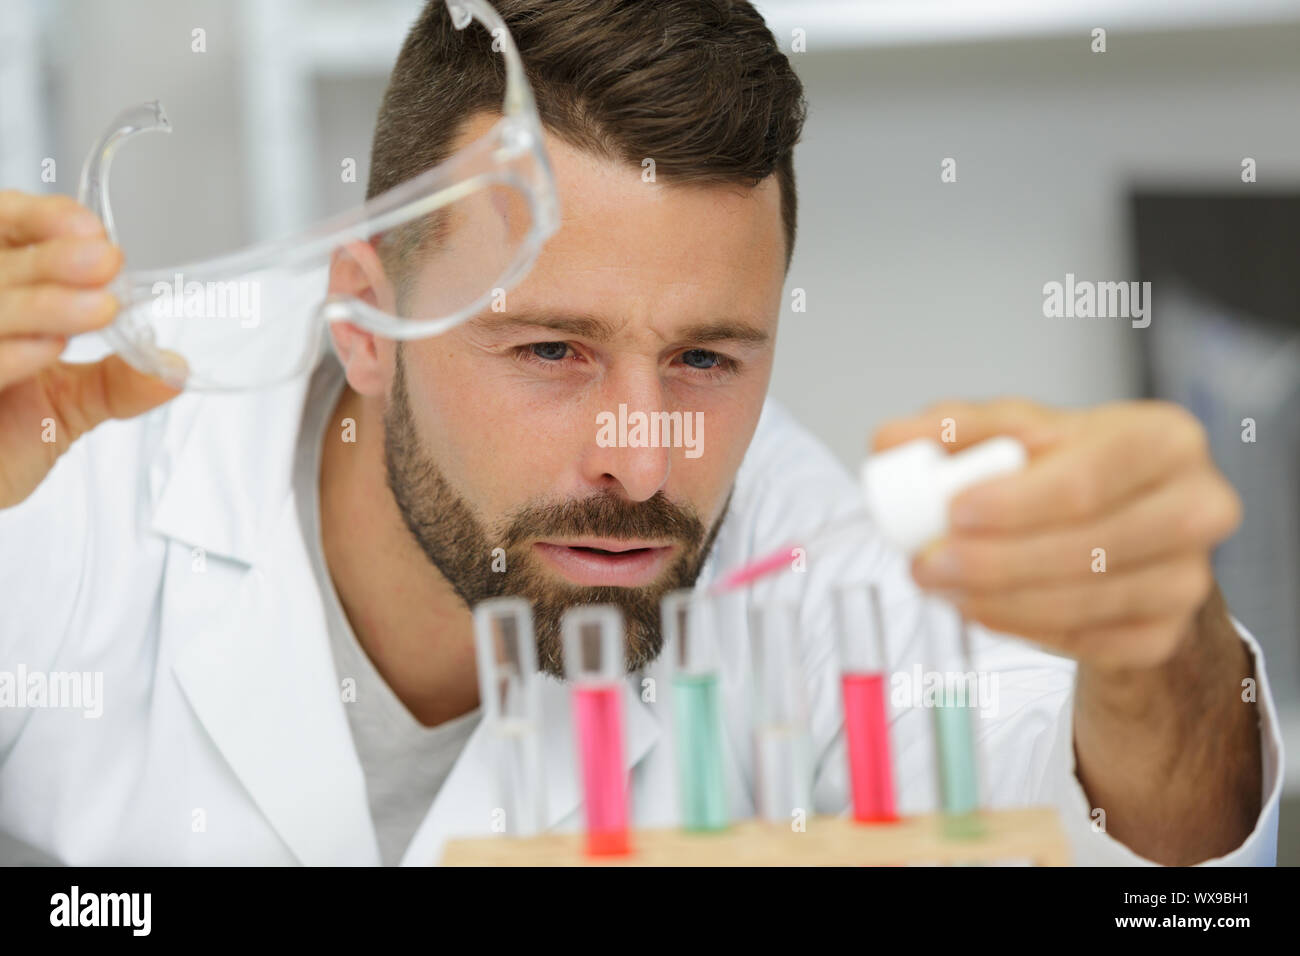 scientist holding an eppendorf tube and pipette Stock Photo